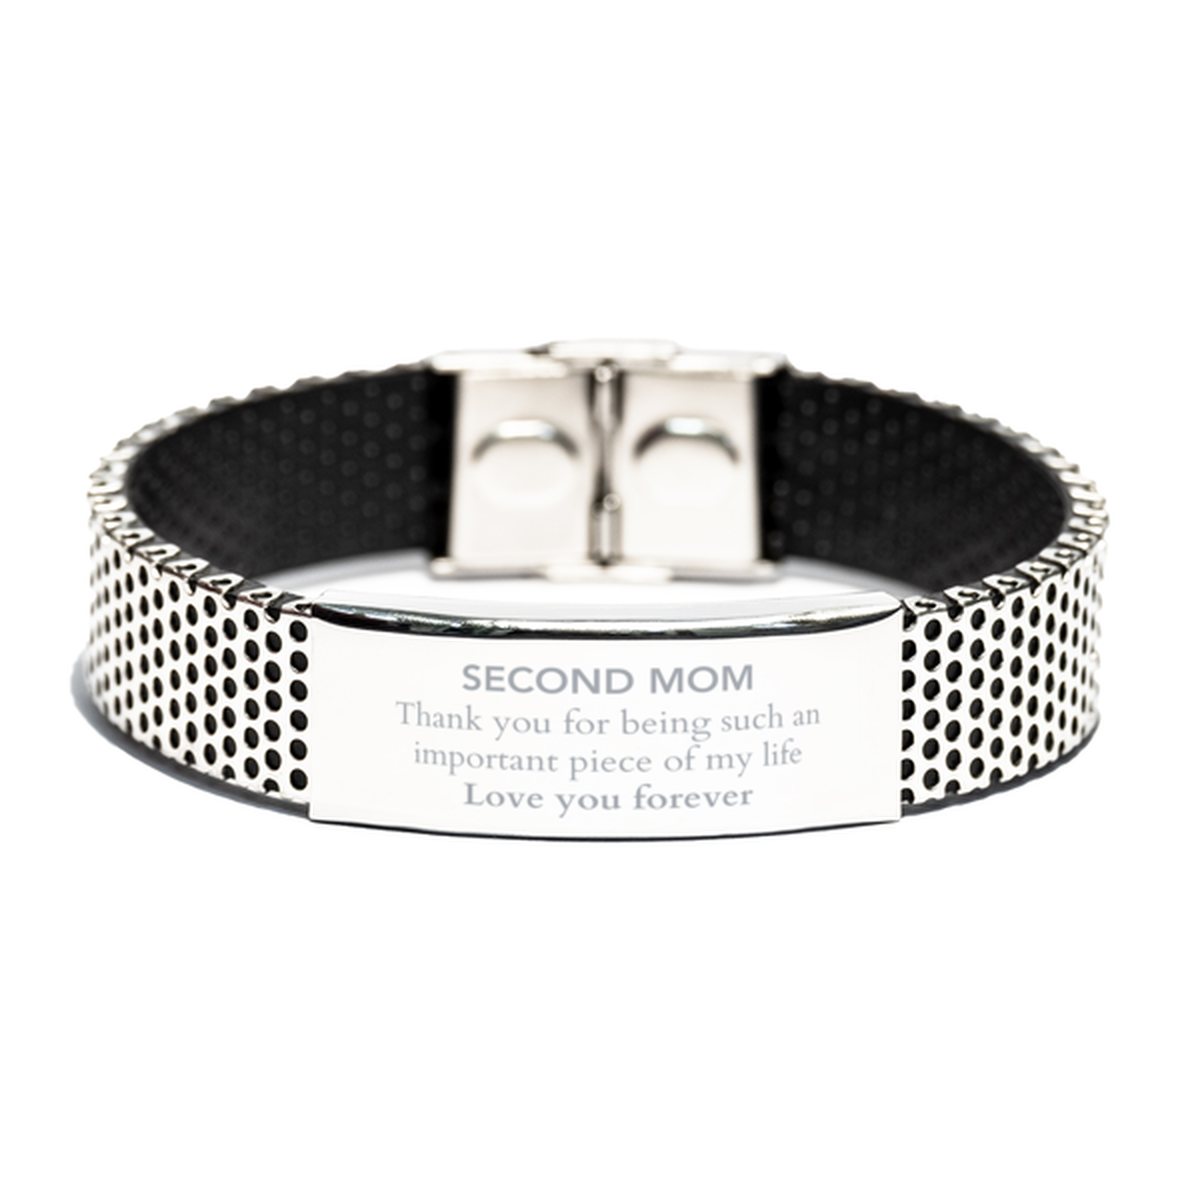 Appropriate Second Mom Stainless Steel Bracelet Epic Birthday Gifts for Second Mom Thank you for being such an important piece of my life Second Mom Christmas Mothers Fathers Day